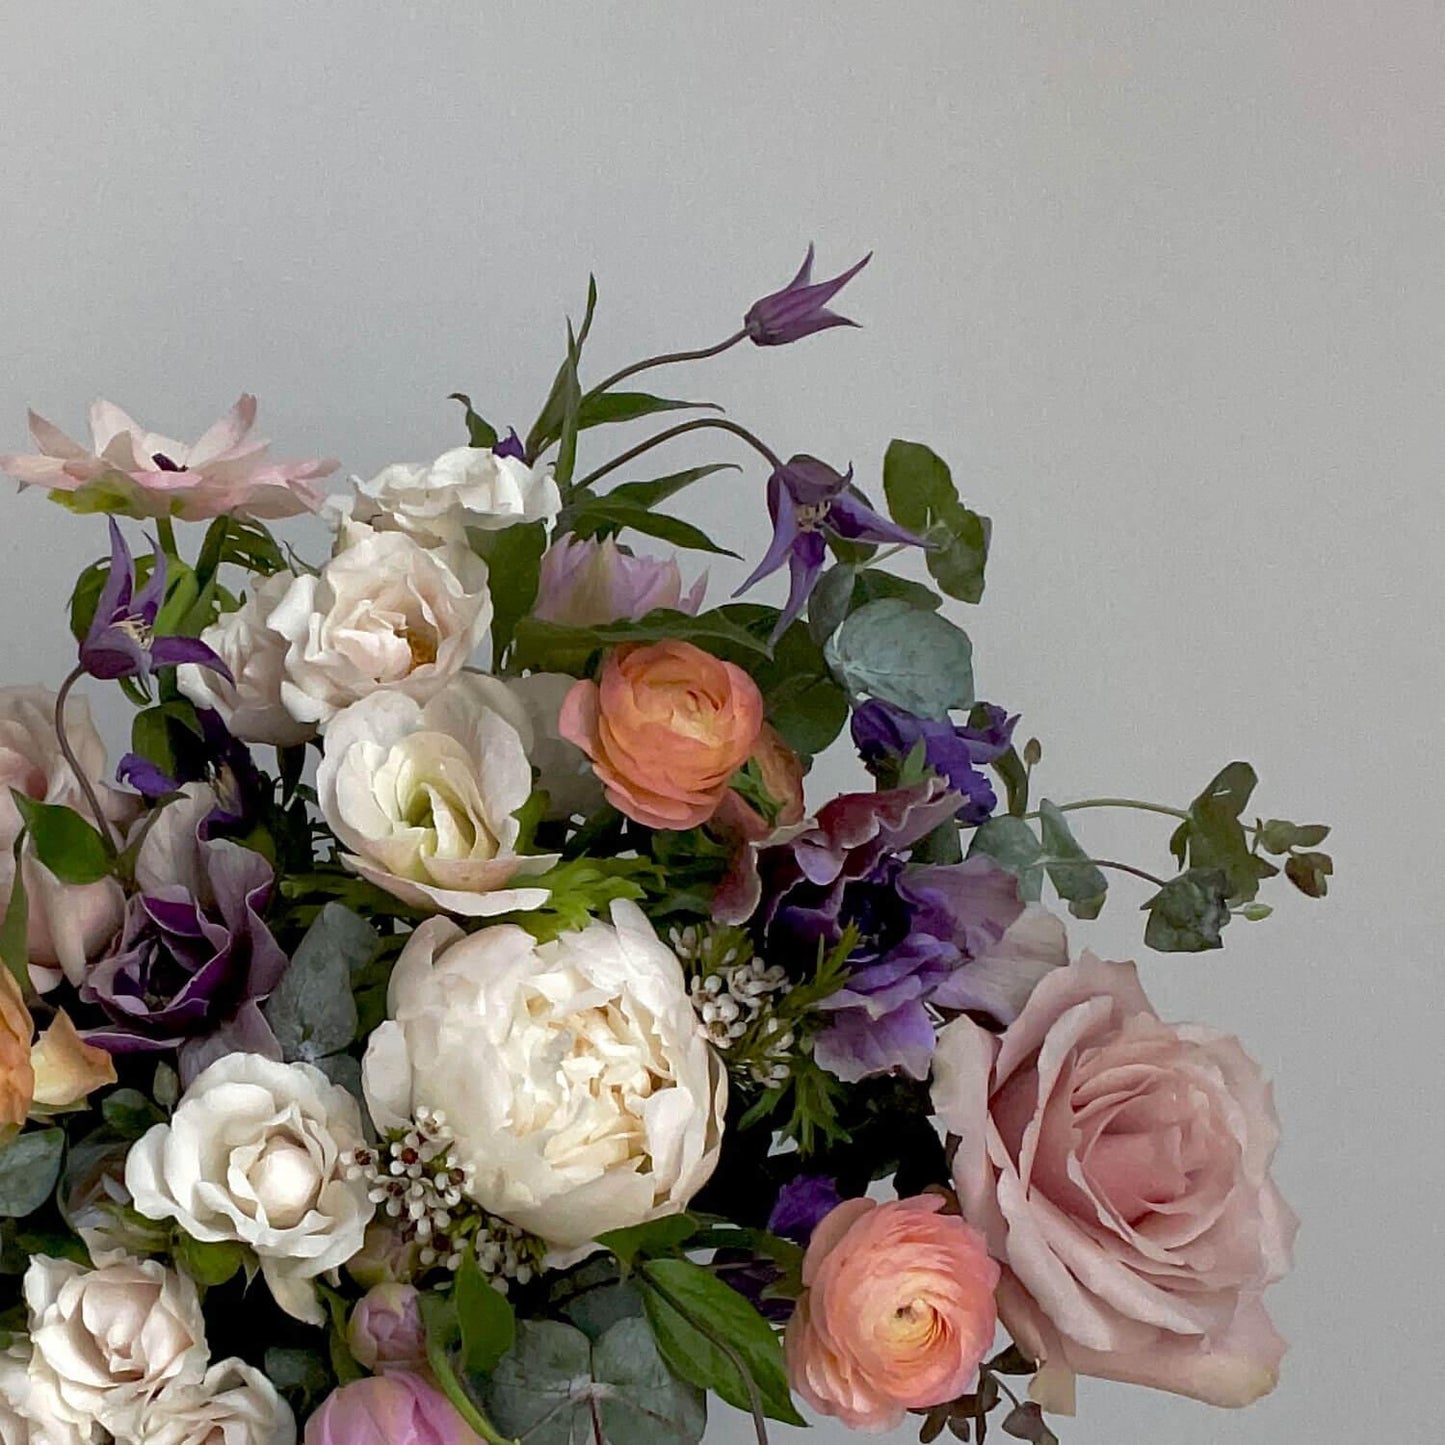 Close-up Image of a bouquet inspired by dusky lilac hues, mostly white with moody lavender, rose, and apricot flowers. A thoughtful and romantic combination. Order online for same-day flower delivery from Toronto's best florist, available near you.